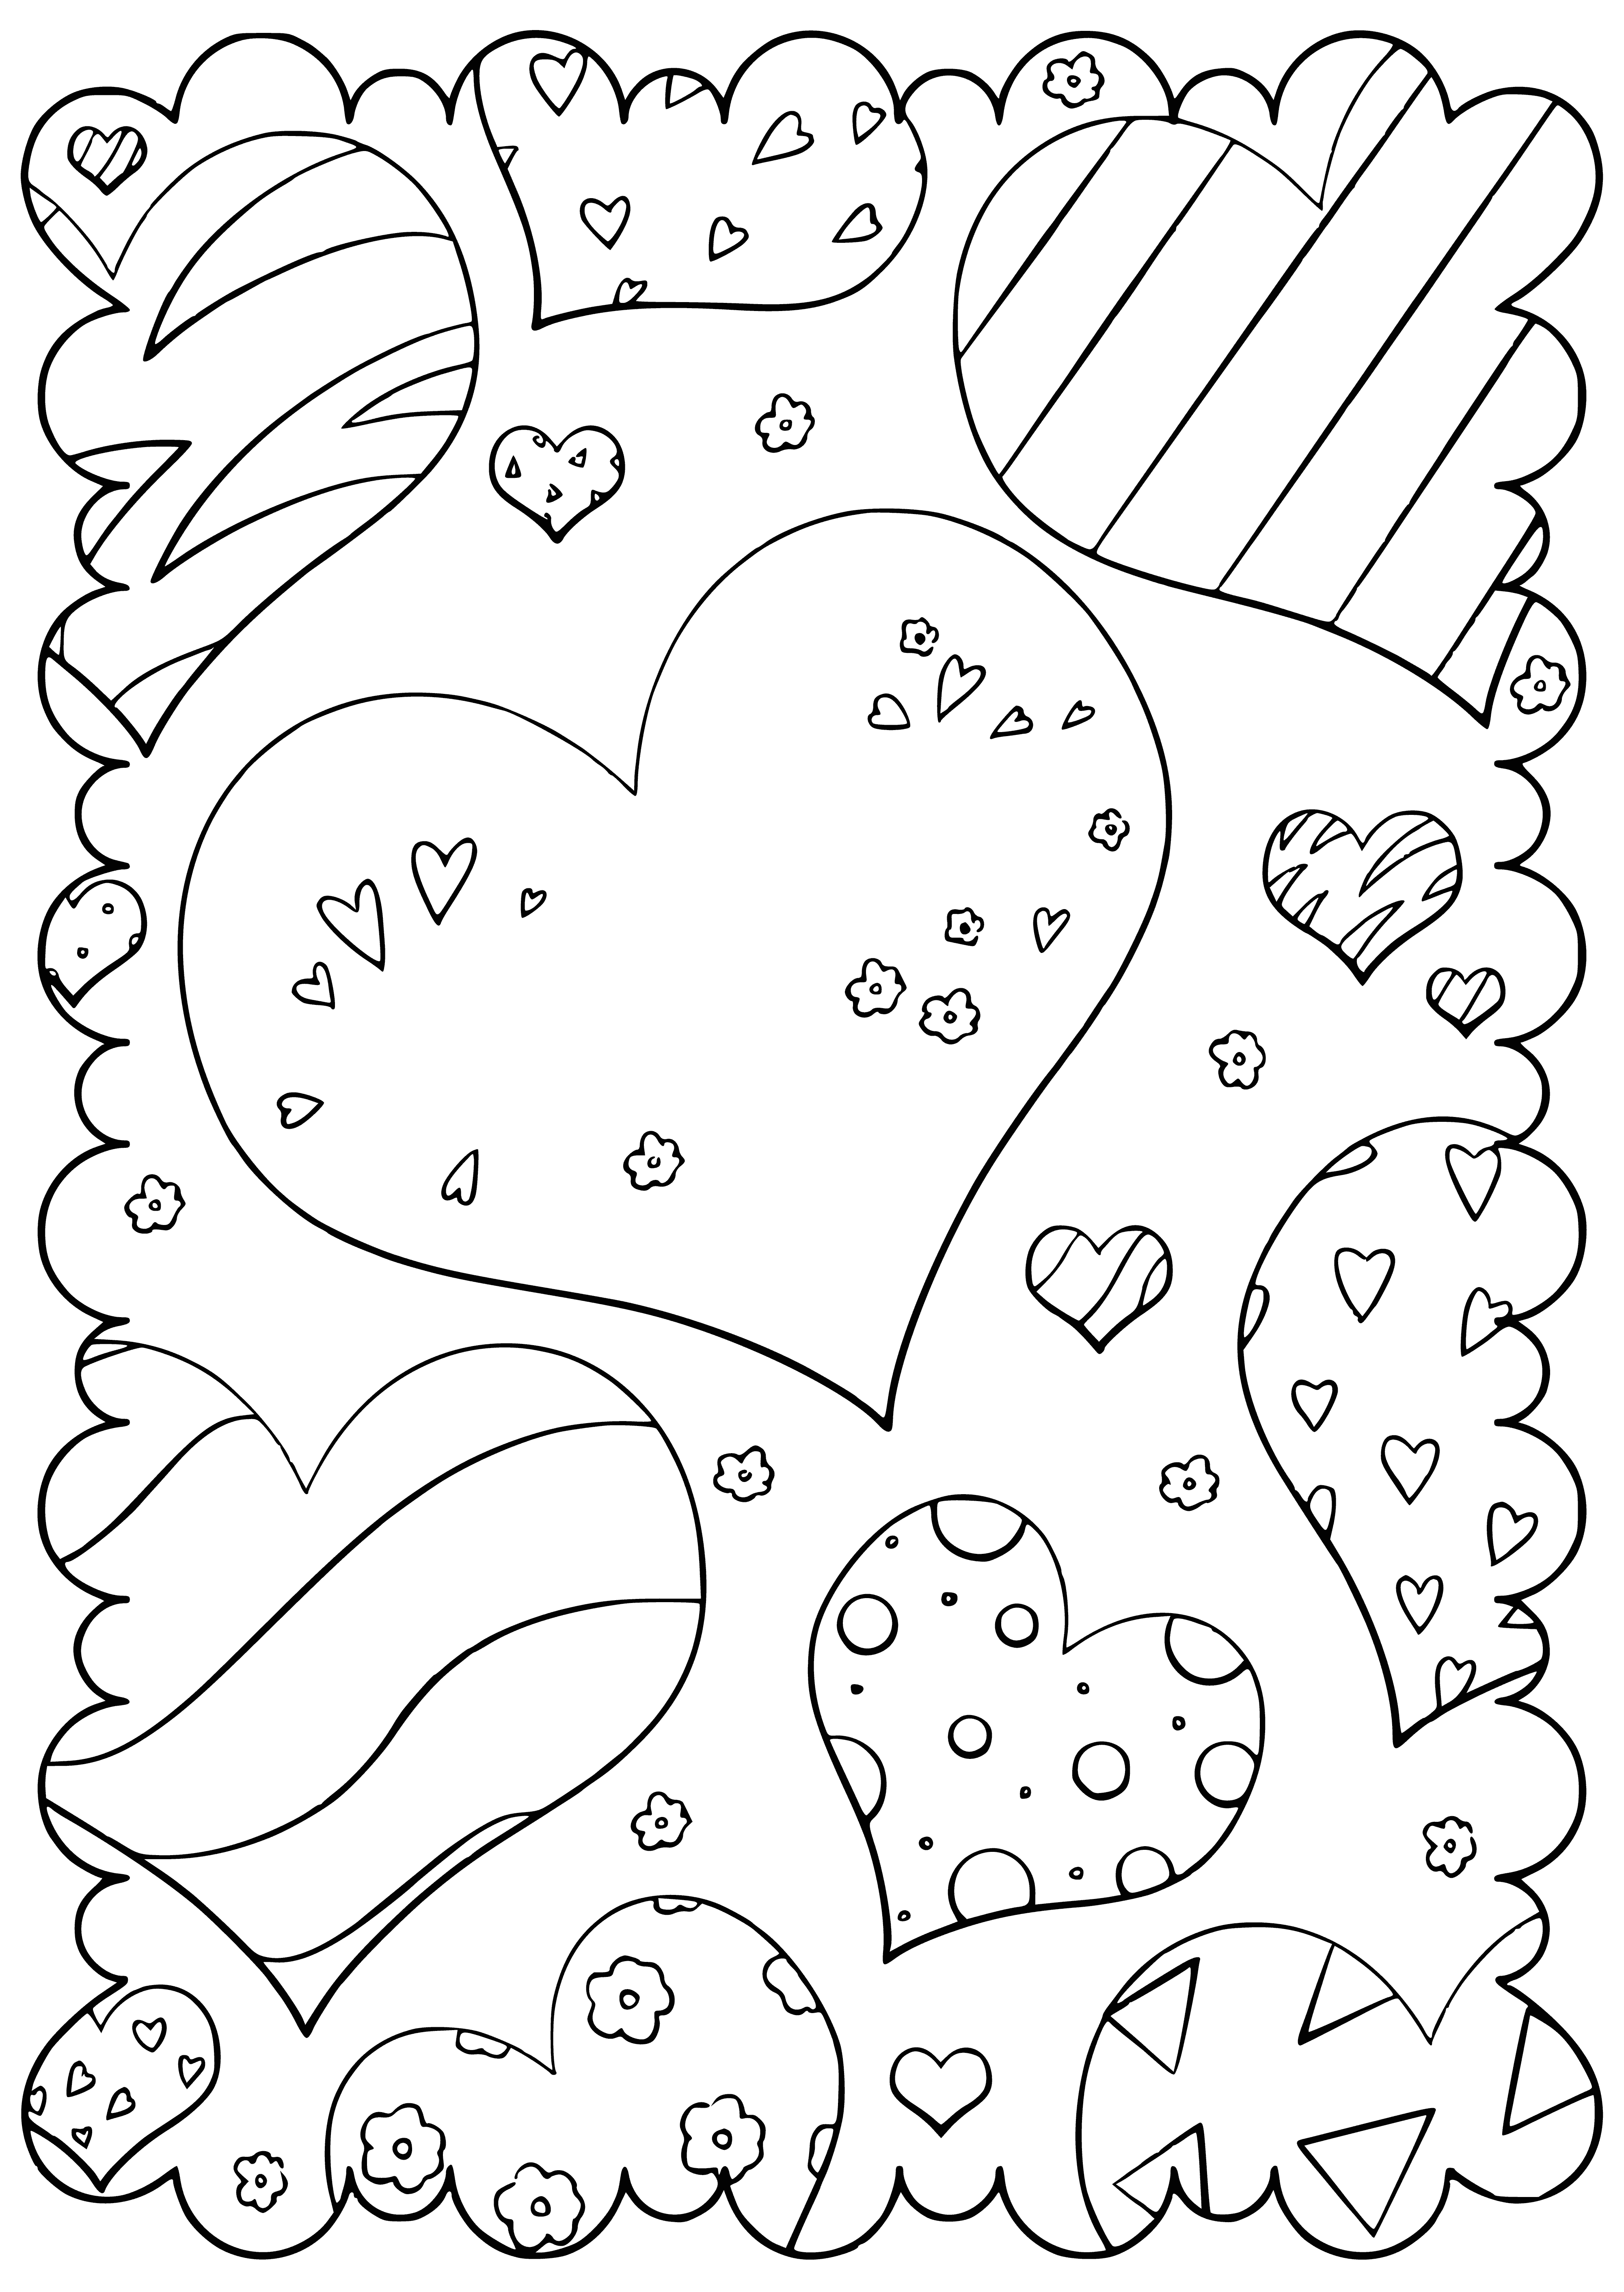 coloring page: 3 people in coloring page holding a red rose, balloon, & small hearts - all happy! #valentinesday